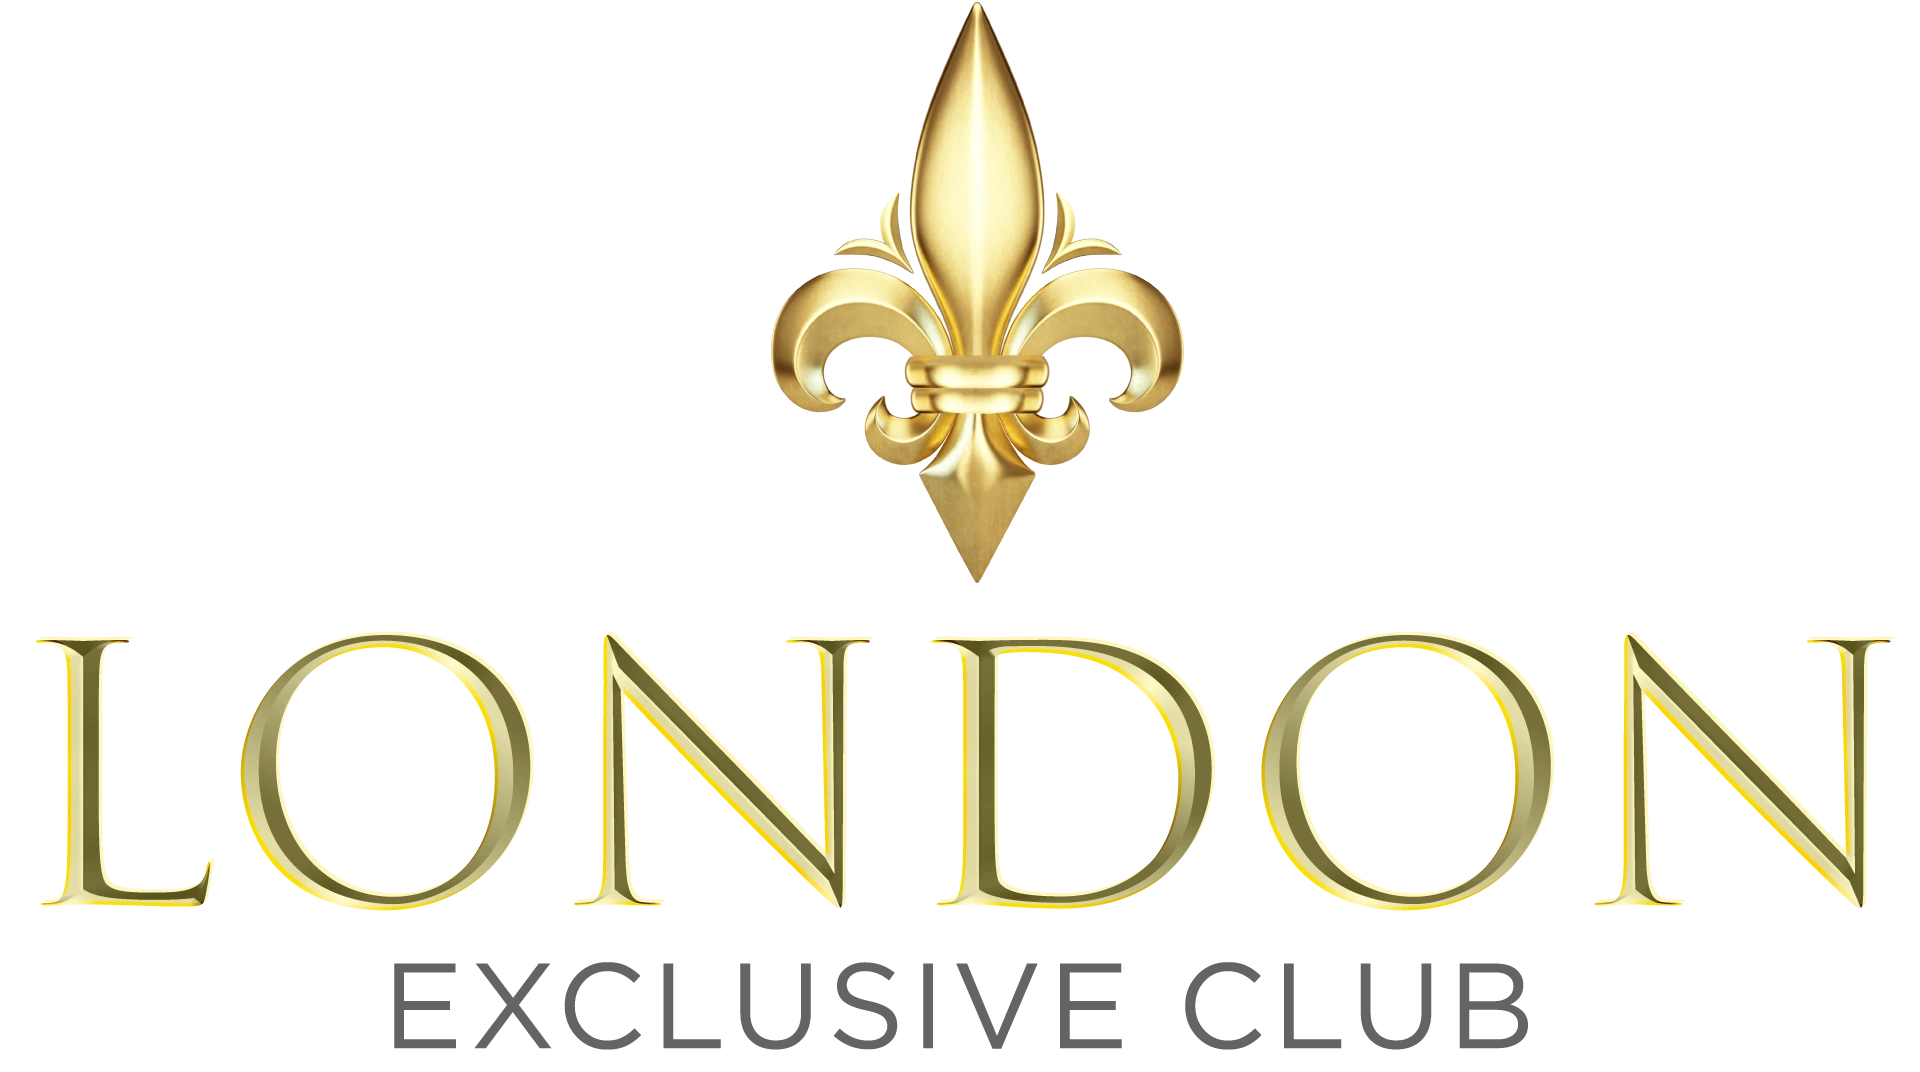 London Exclusive Club - A select community for high-achieving individuals